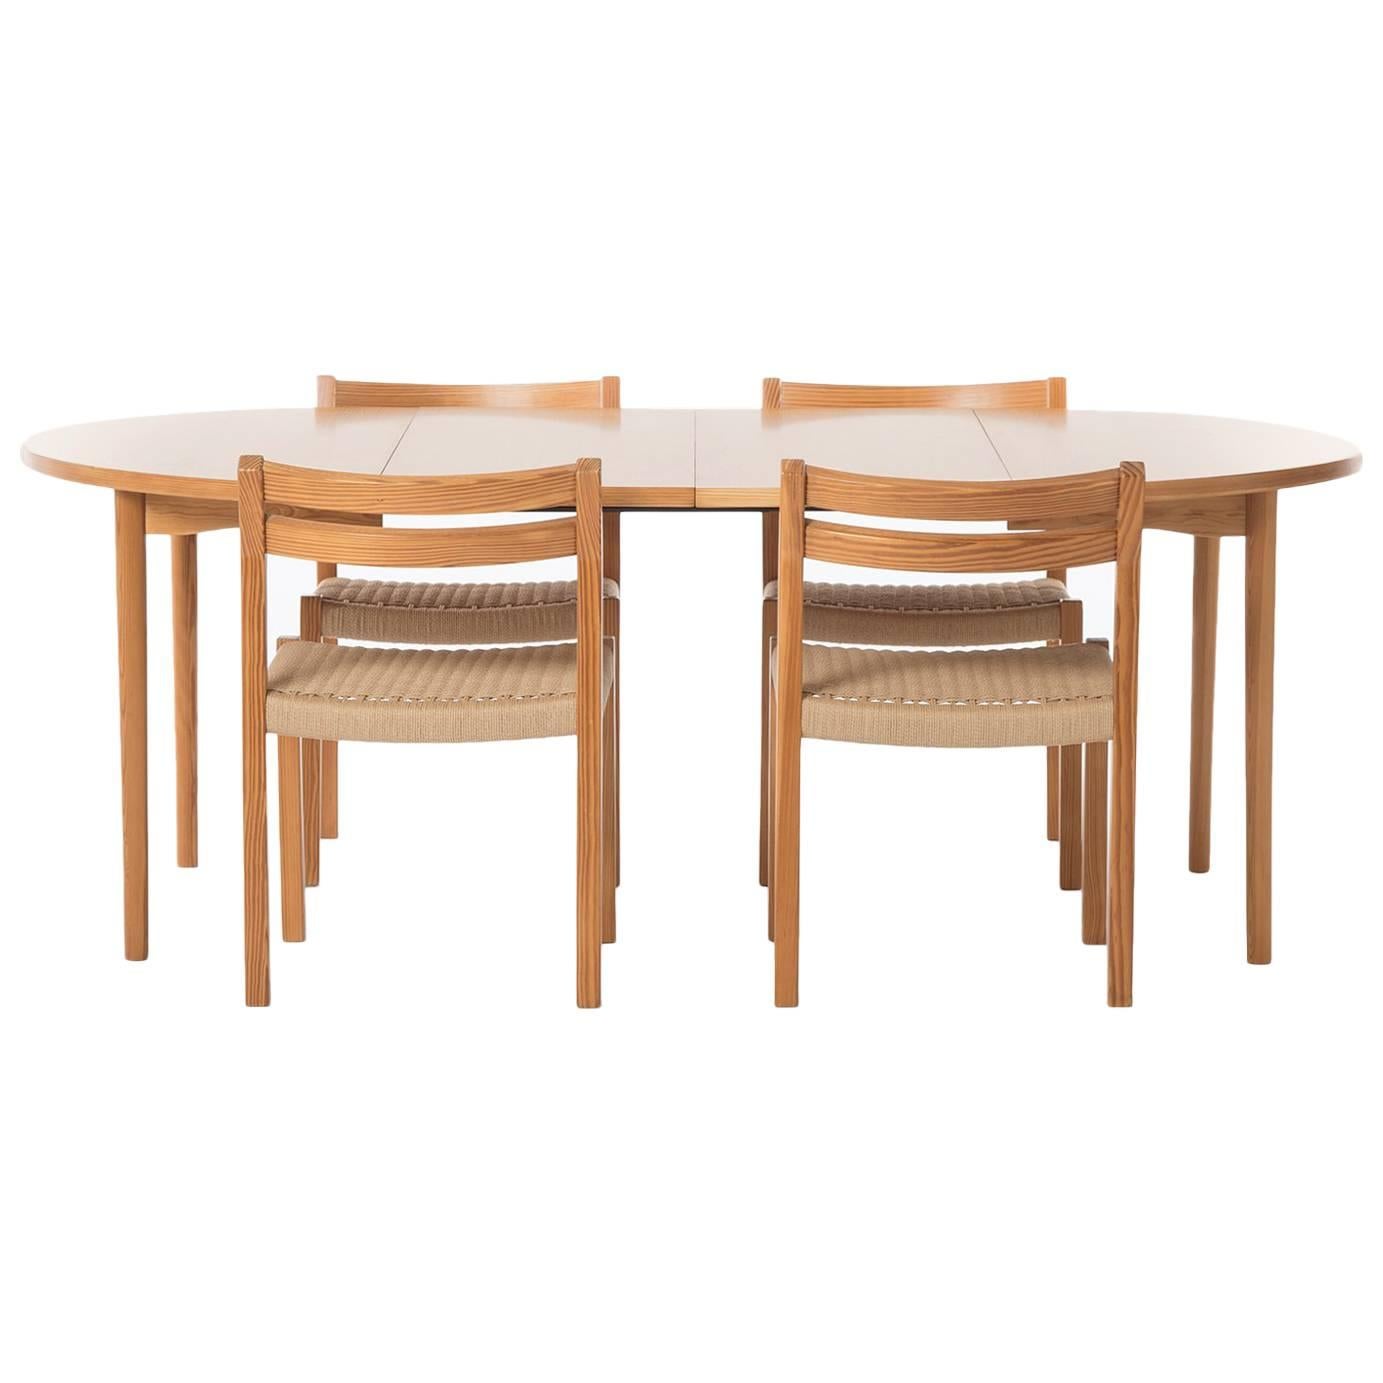 Fir Dining Table Set with 4 Chairs